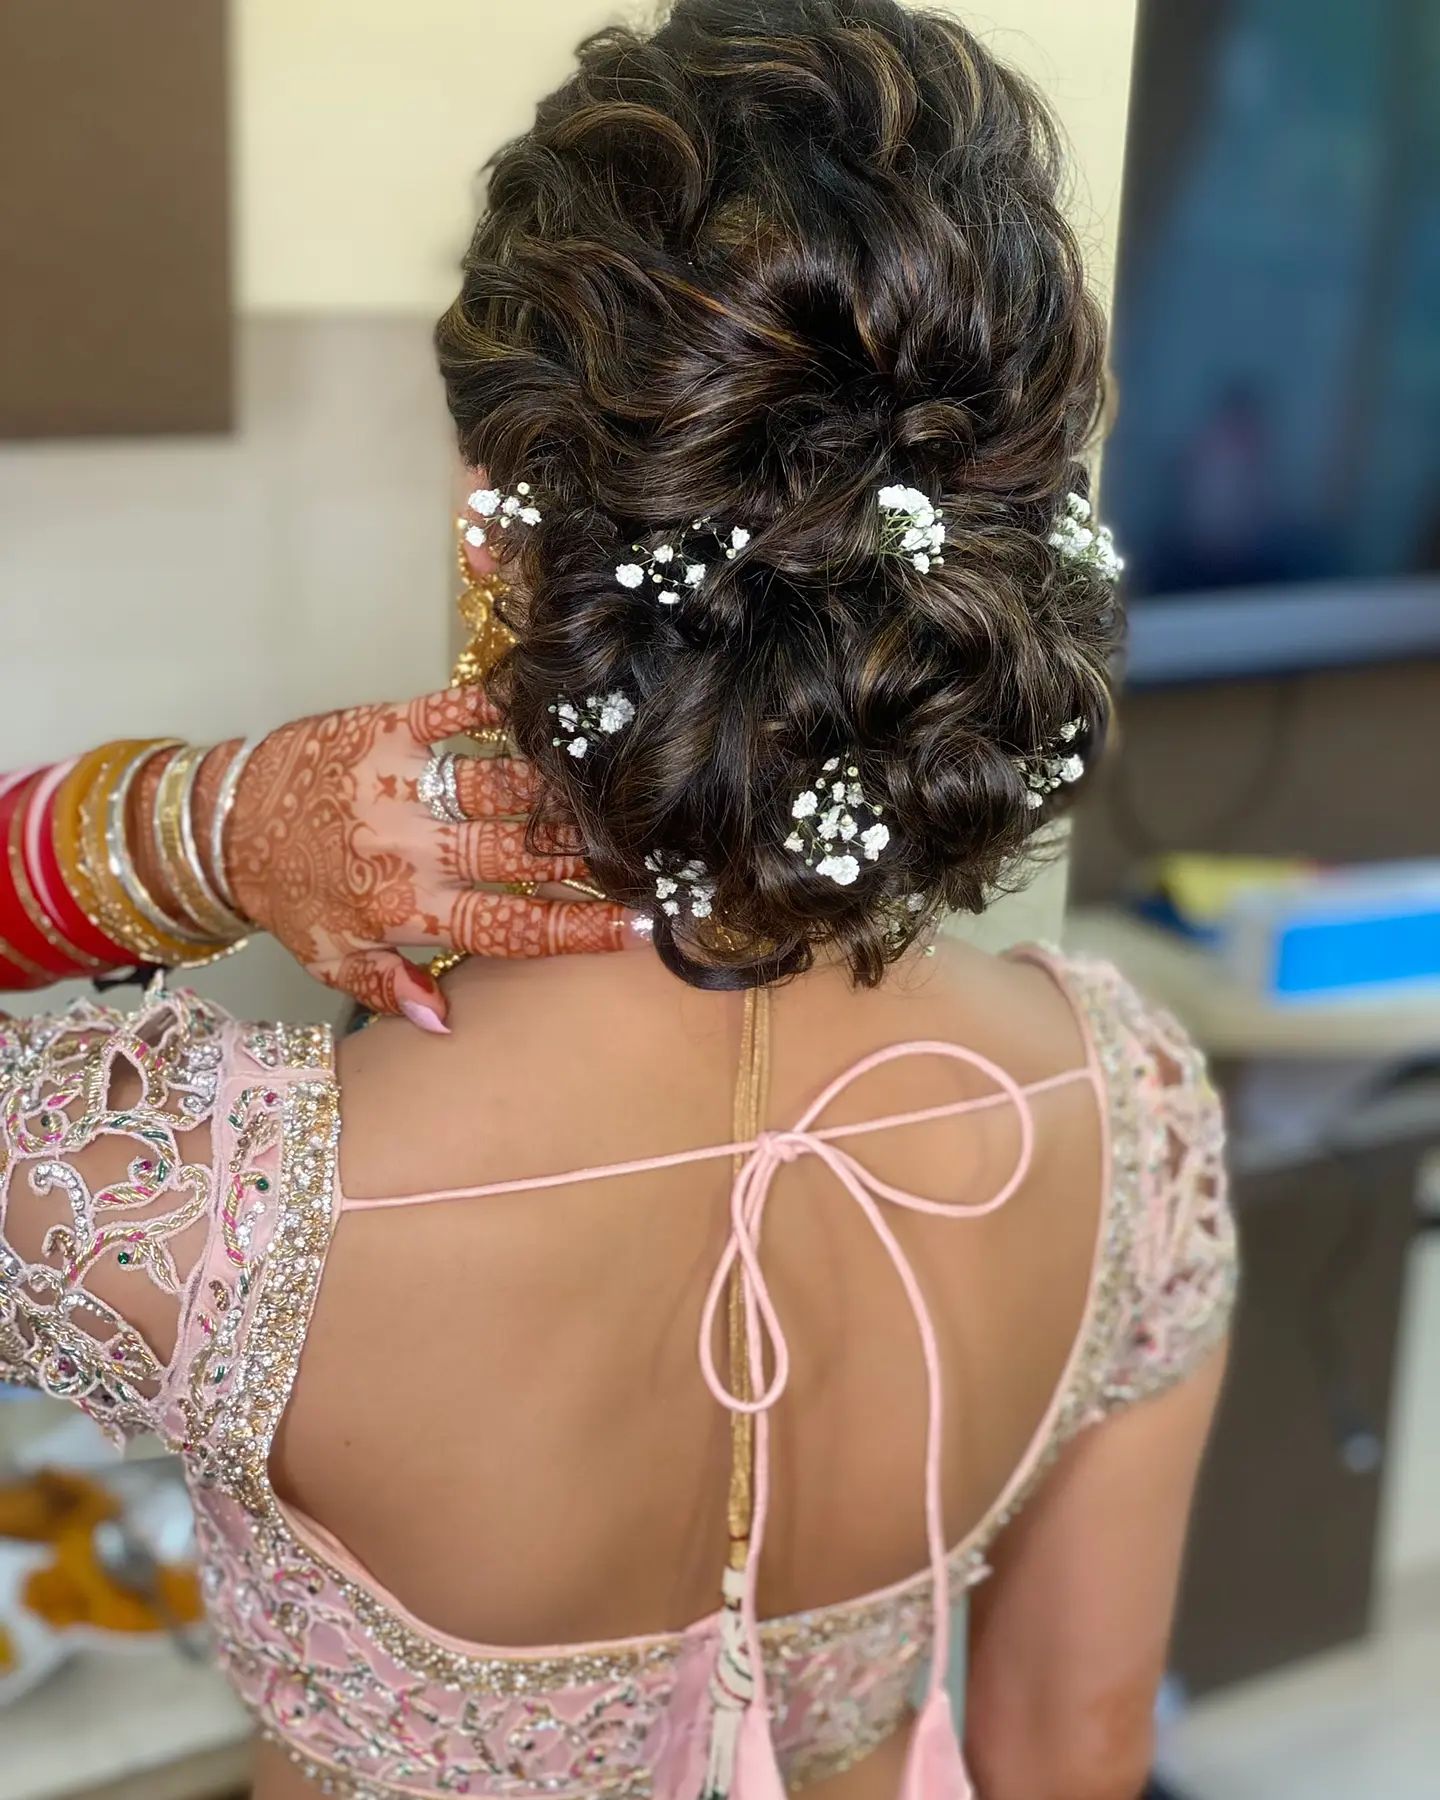 Beautiful New Hairstyle, most beautiful hairstyles for party and wedding |  hairstyle open hair | hairstyle juda simple self 1 minute everyday  hairstyles for work | 1 minute bun hairstyles | cute